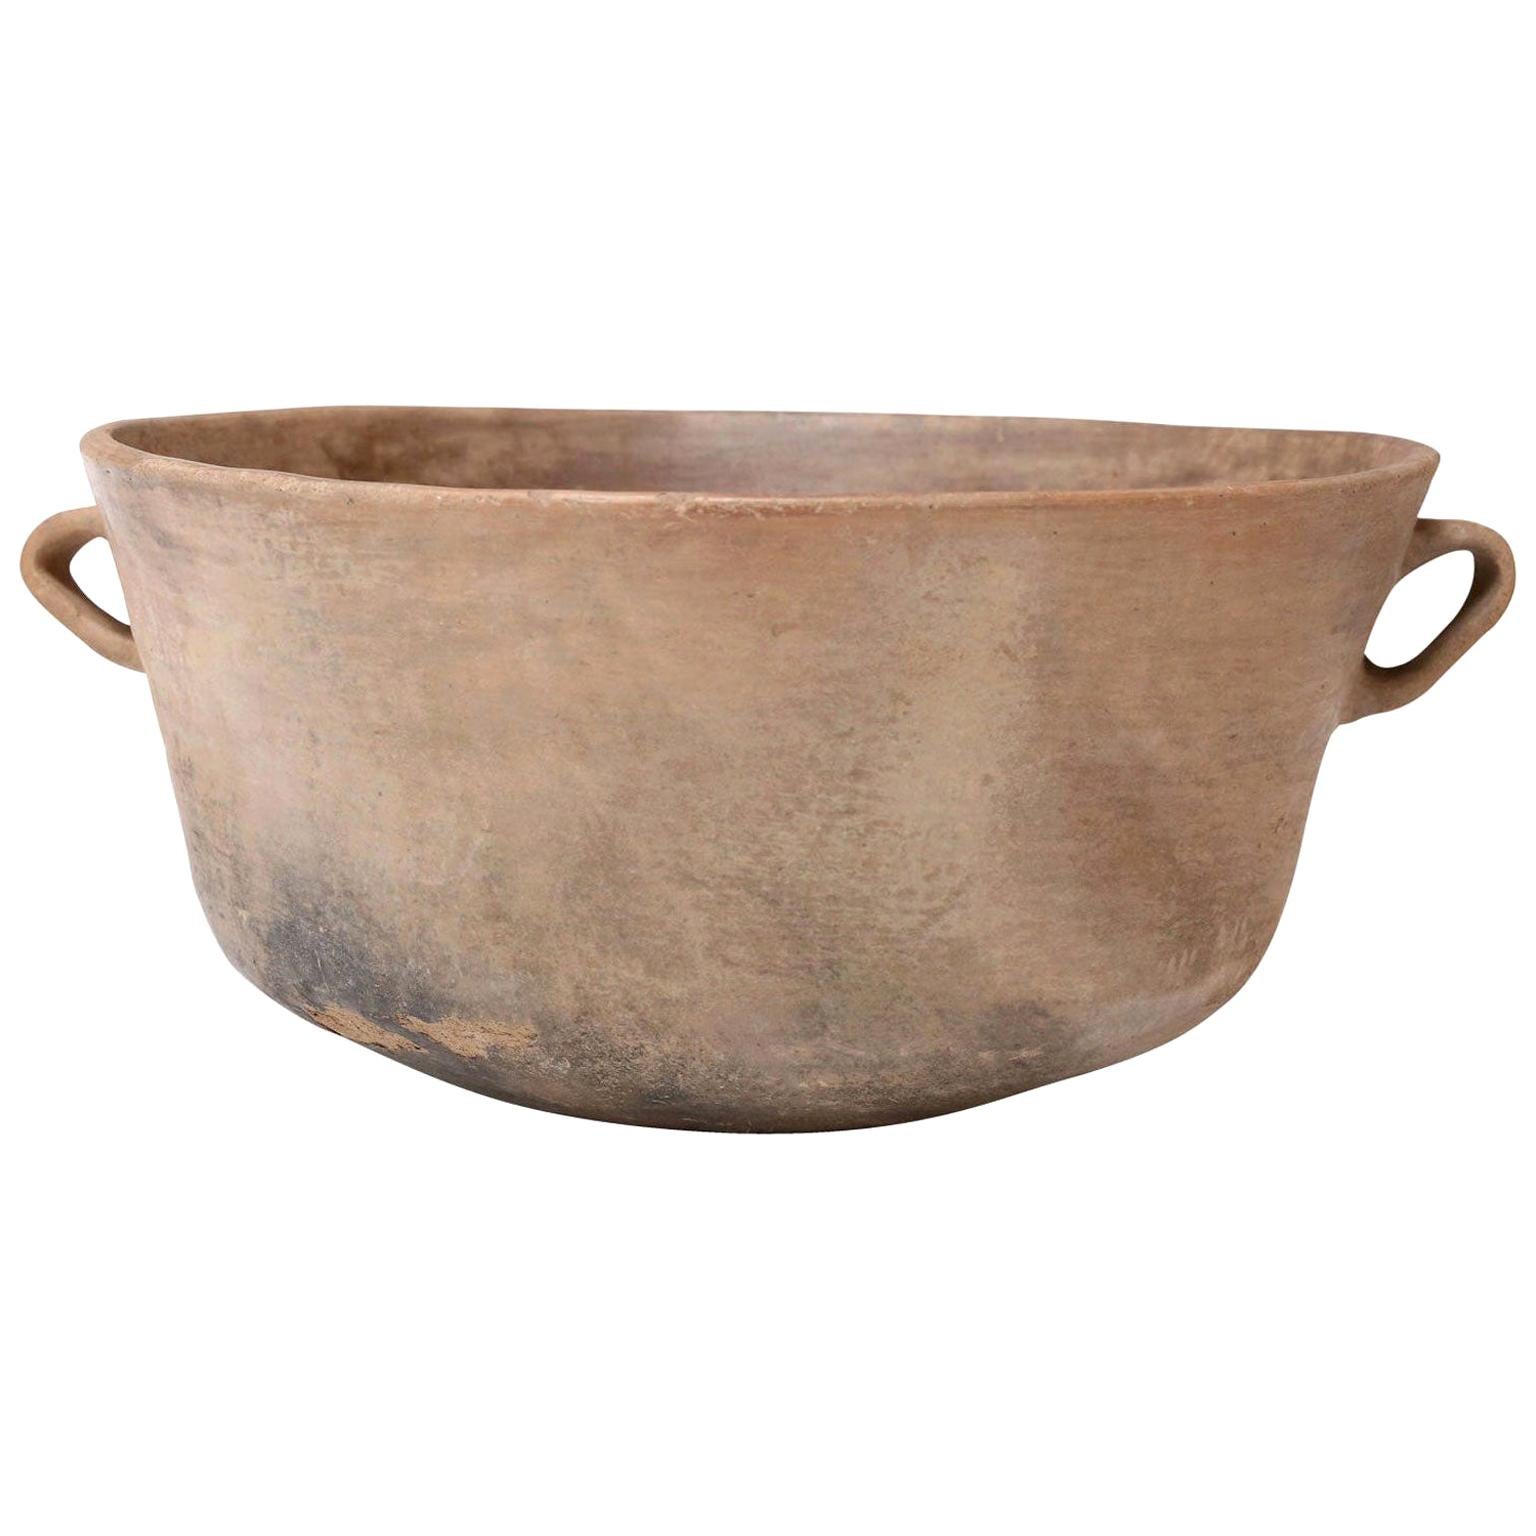 Large Primitive Clay Cooking Bowl